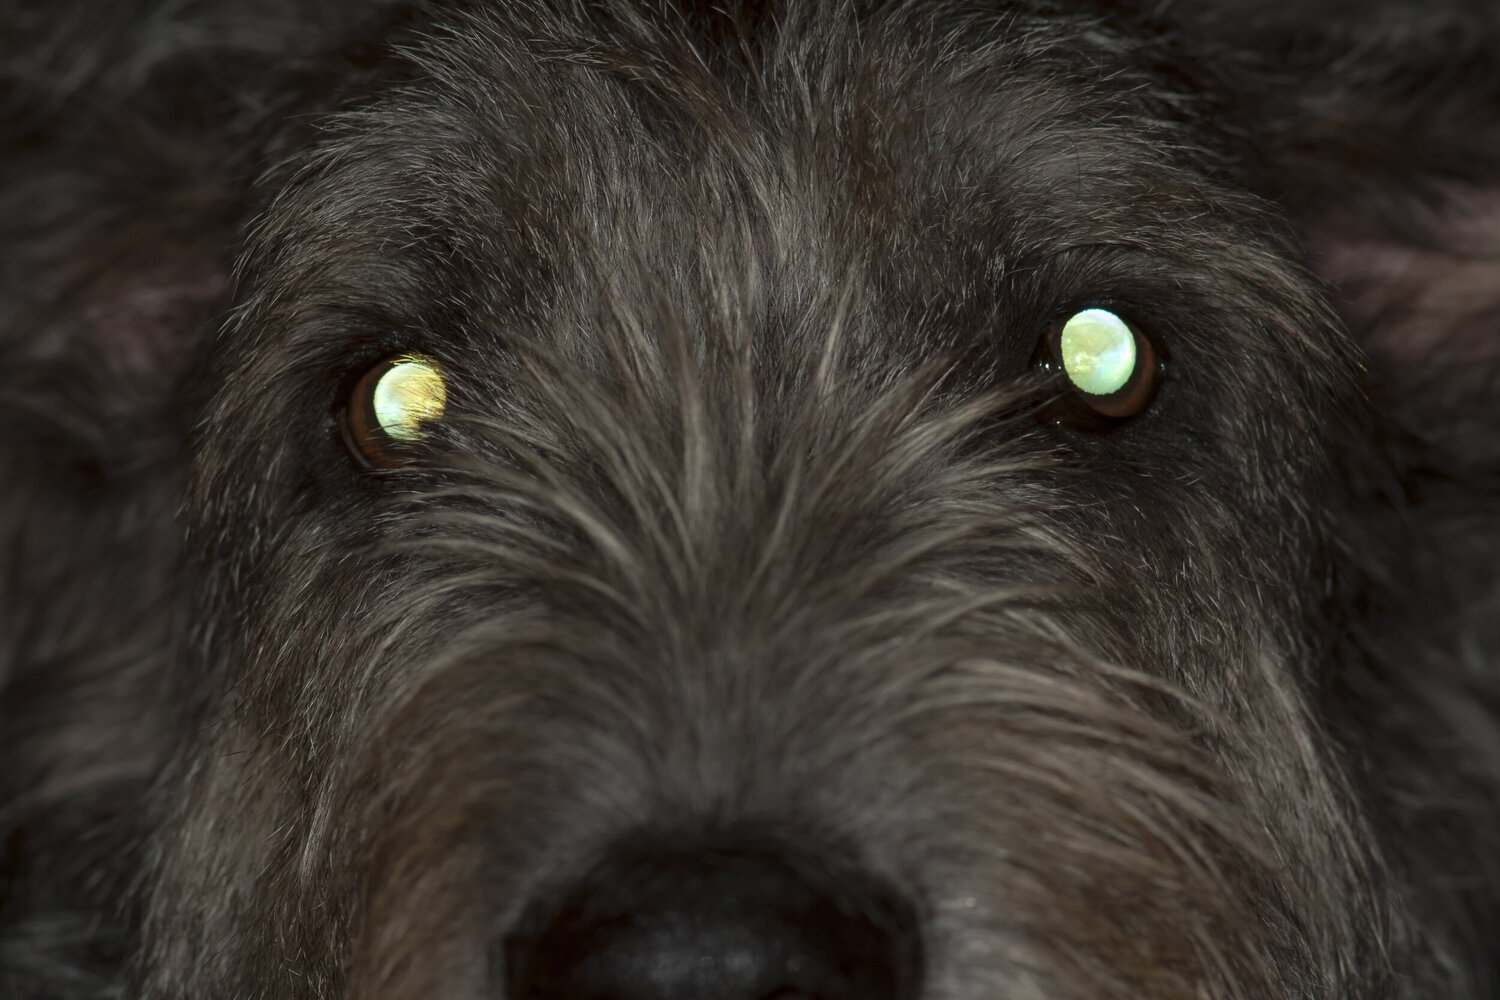 Why Does My Dog's Eye Reflect?